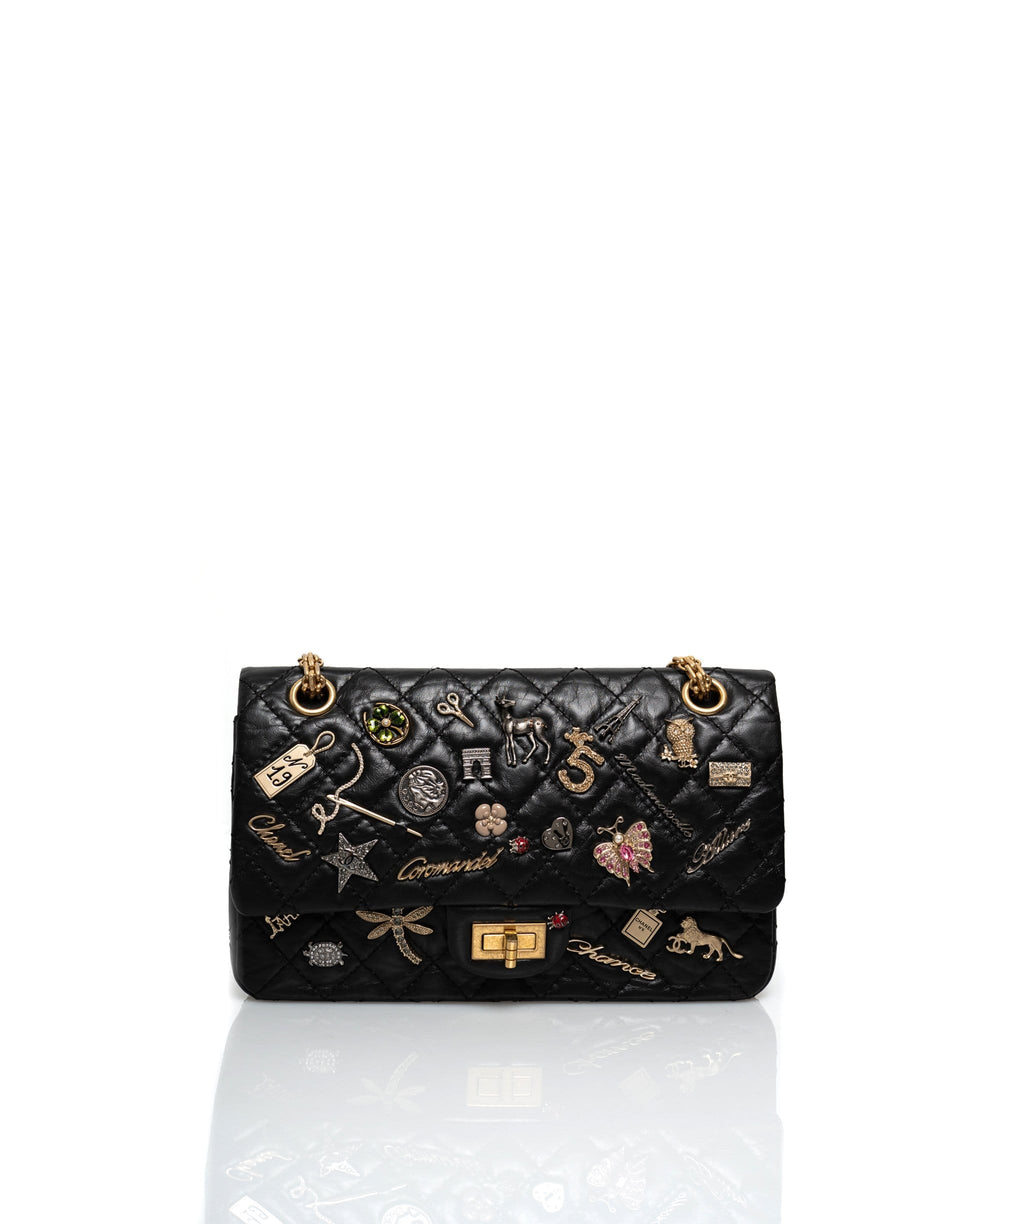 Chanel Black Lucky Charms Reissue 255 Double Flap Bag Chanel  TLC